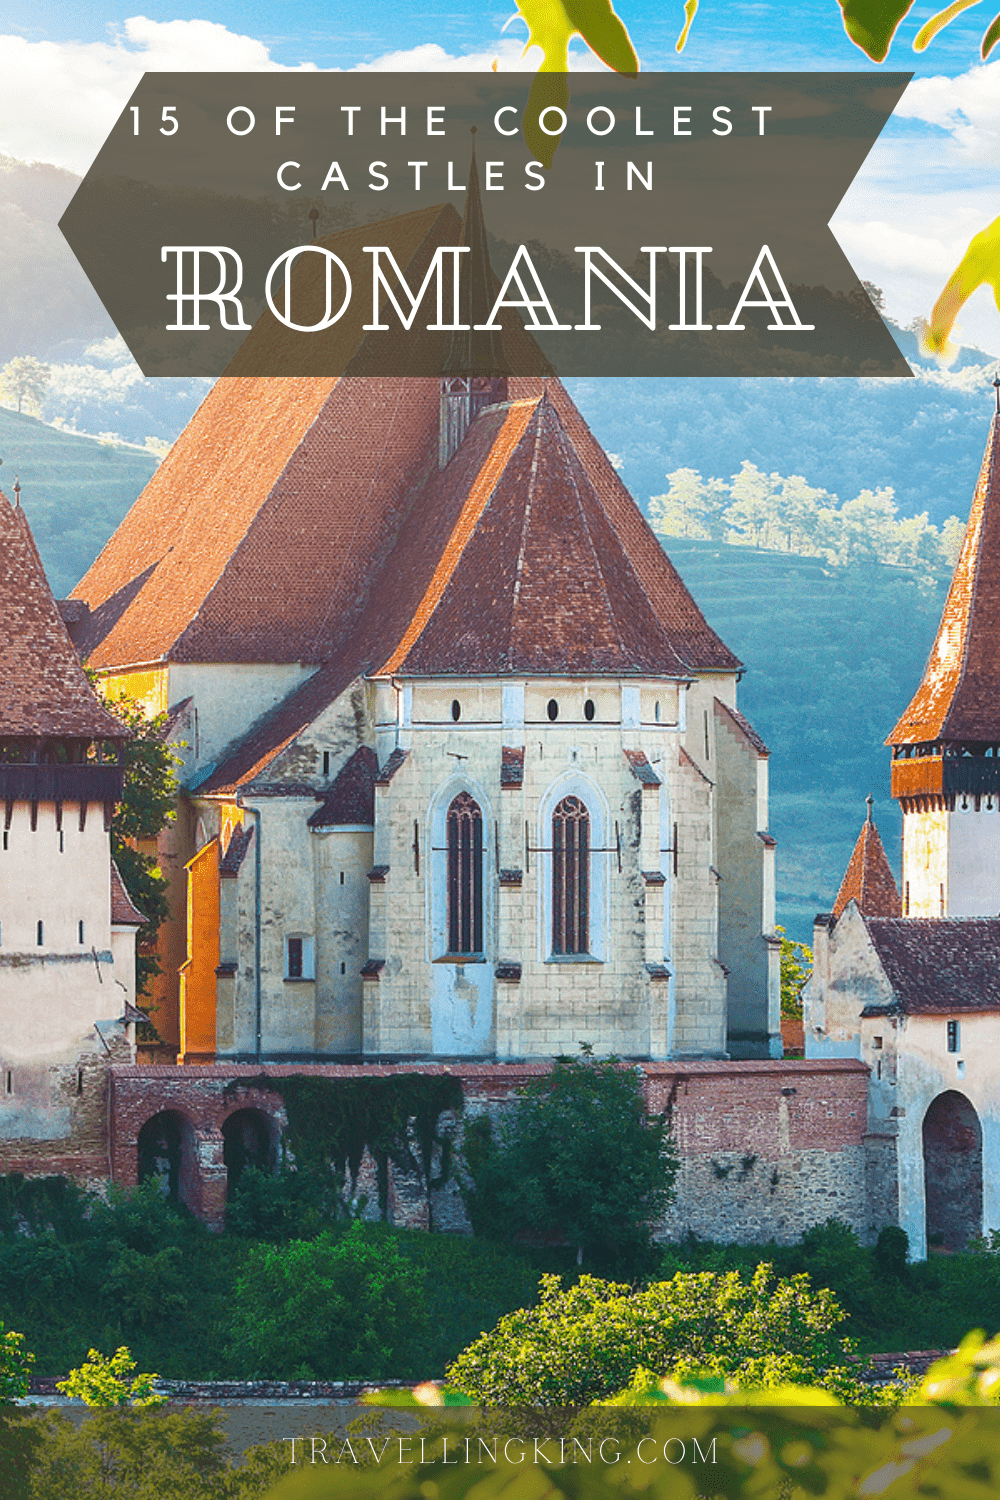 15 of the Coolest Castles in Romania